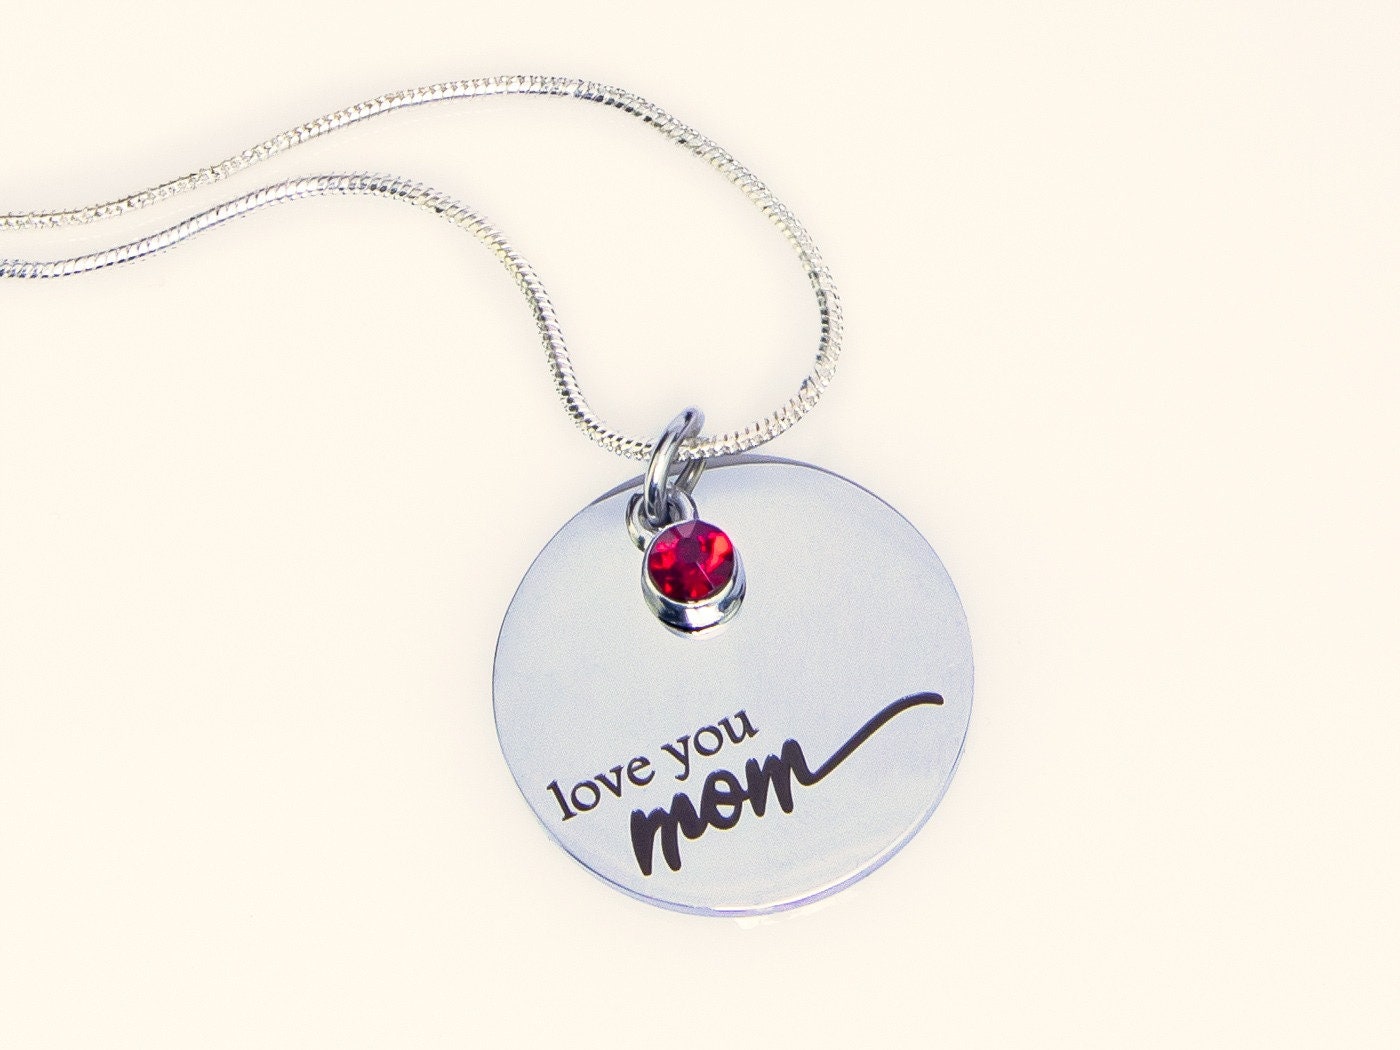 Love you MOM necklace engraved on silver pendant with BIRTHSTONE